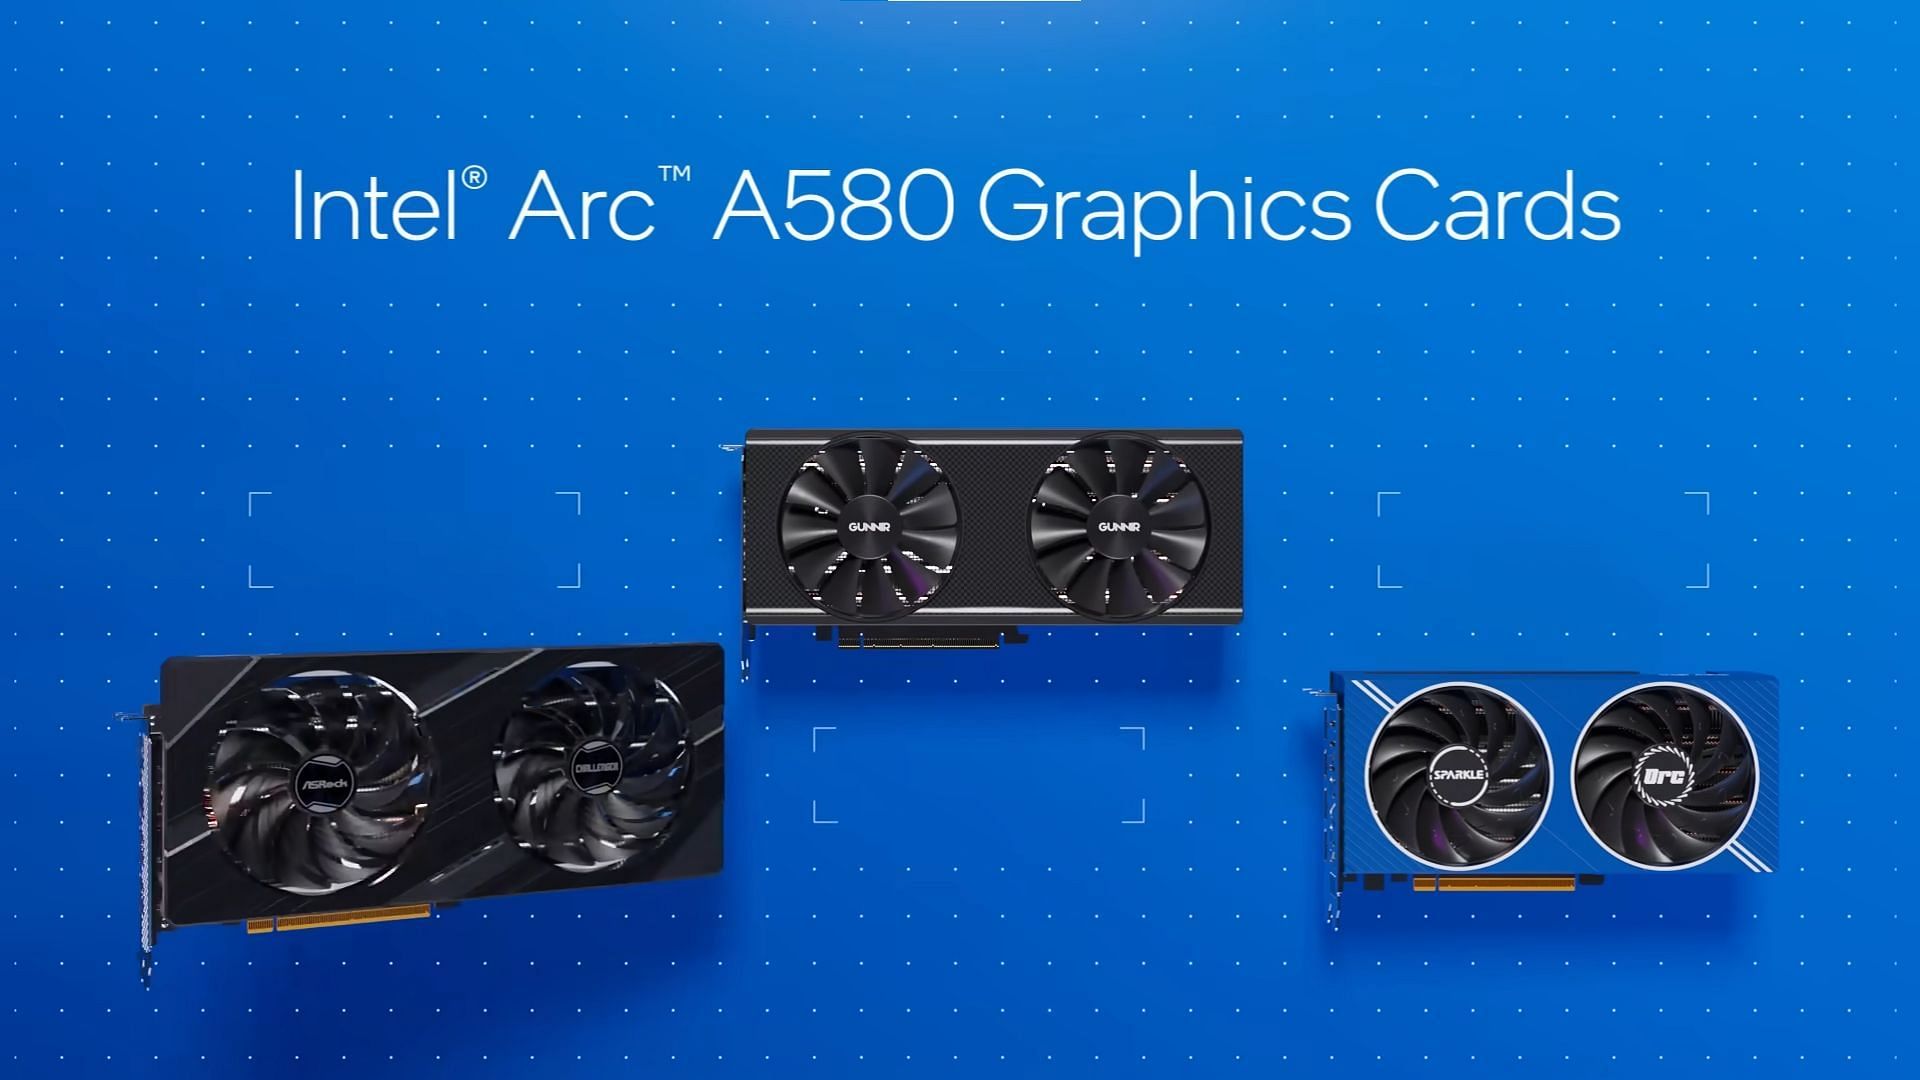 Picture of the Intel Arc A580 graphics cards